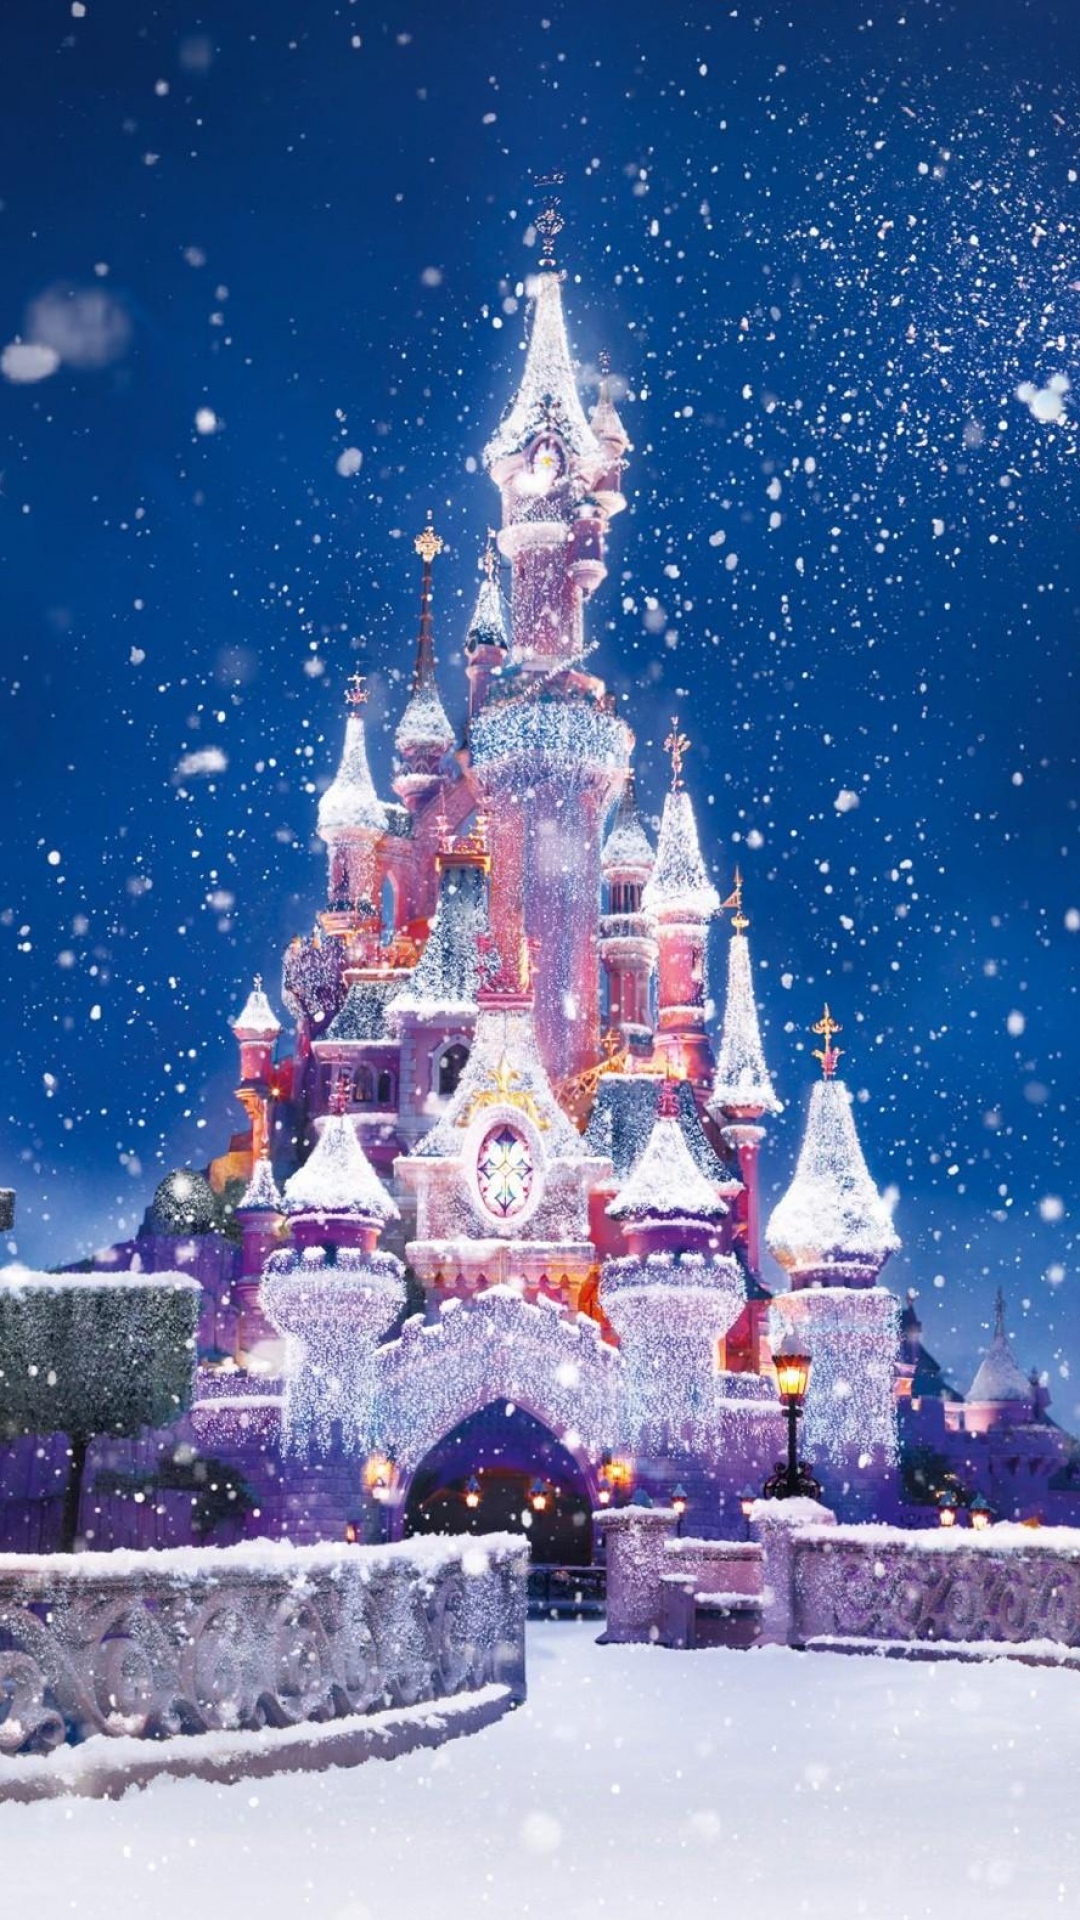 Disney Castle Christmas Lights Snow Android Wallpaper free download